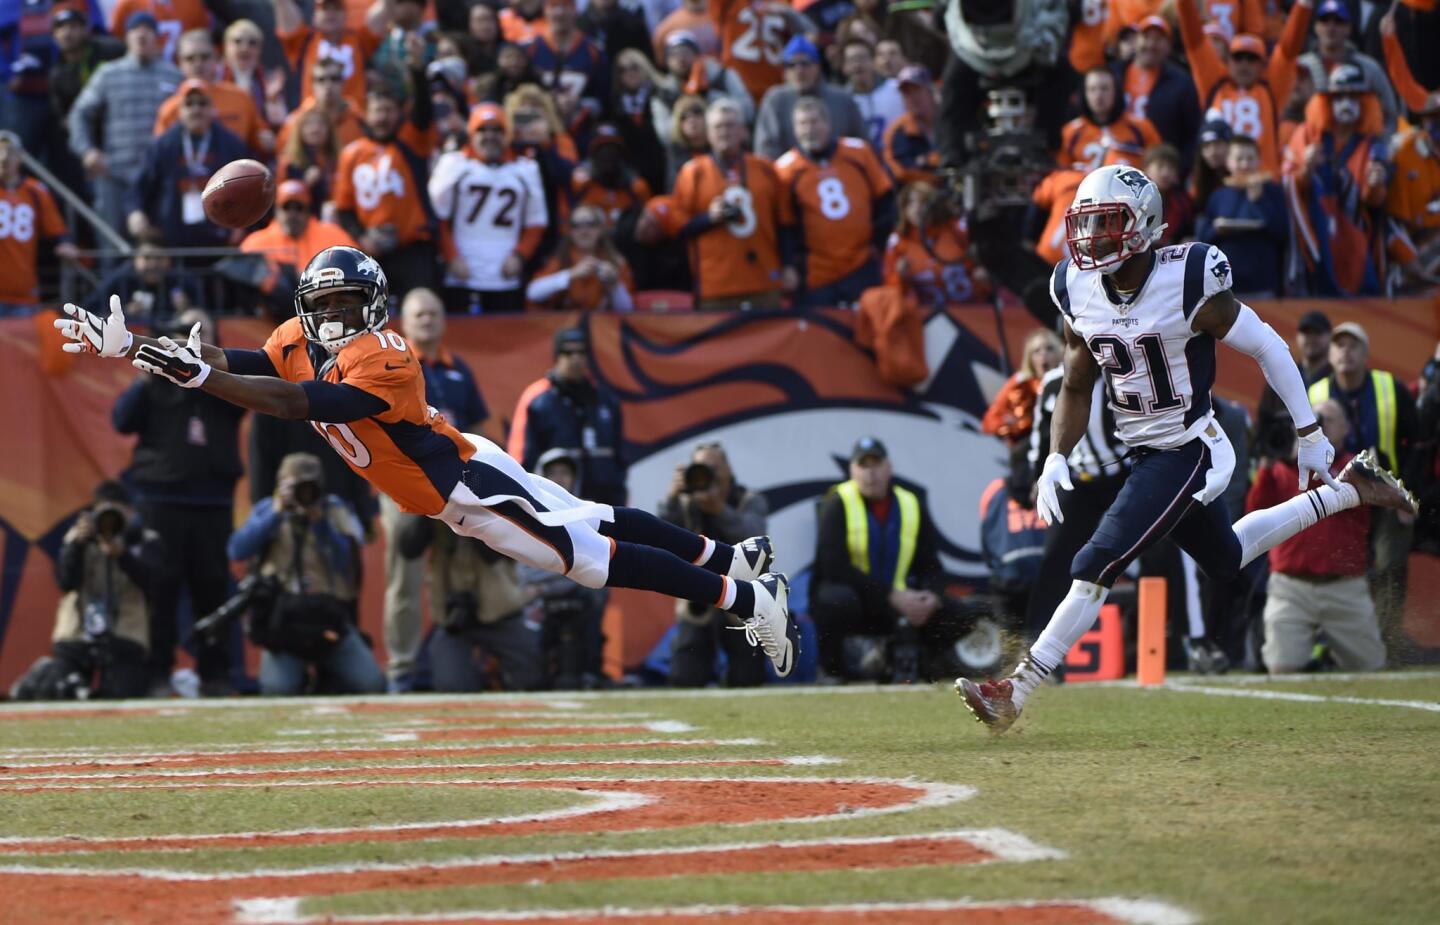 Denver receiver Emmanuel Sanders dives for the ball in front of New England cornerback Malcolm Butler during the first half of the AFC Championship game on Jan. 24.